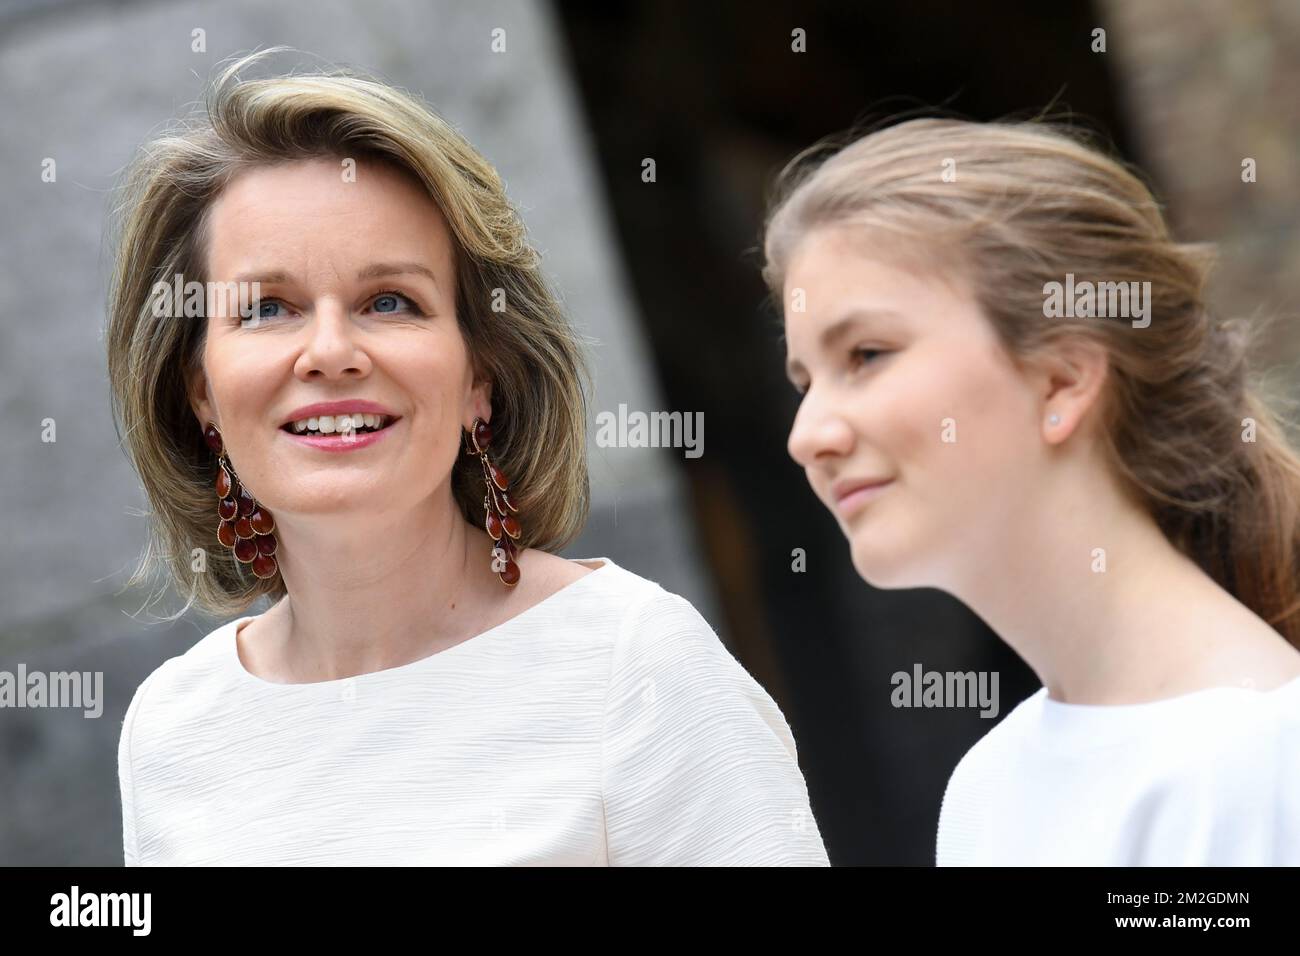 Queen Mathilde of Belgium and Crown Princess Elisabeth pictured during a photoshoot of the Belgian Royal Family's vacation at the Villers Abbey in Villers-la-Ville, Sunday 24 June 2018. BELGA PHOTO POOL FREDERIC SIERAKOWSKI  Stock Photo